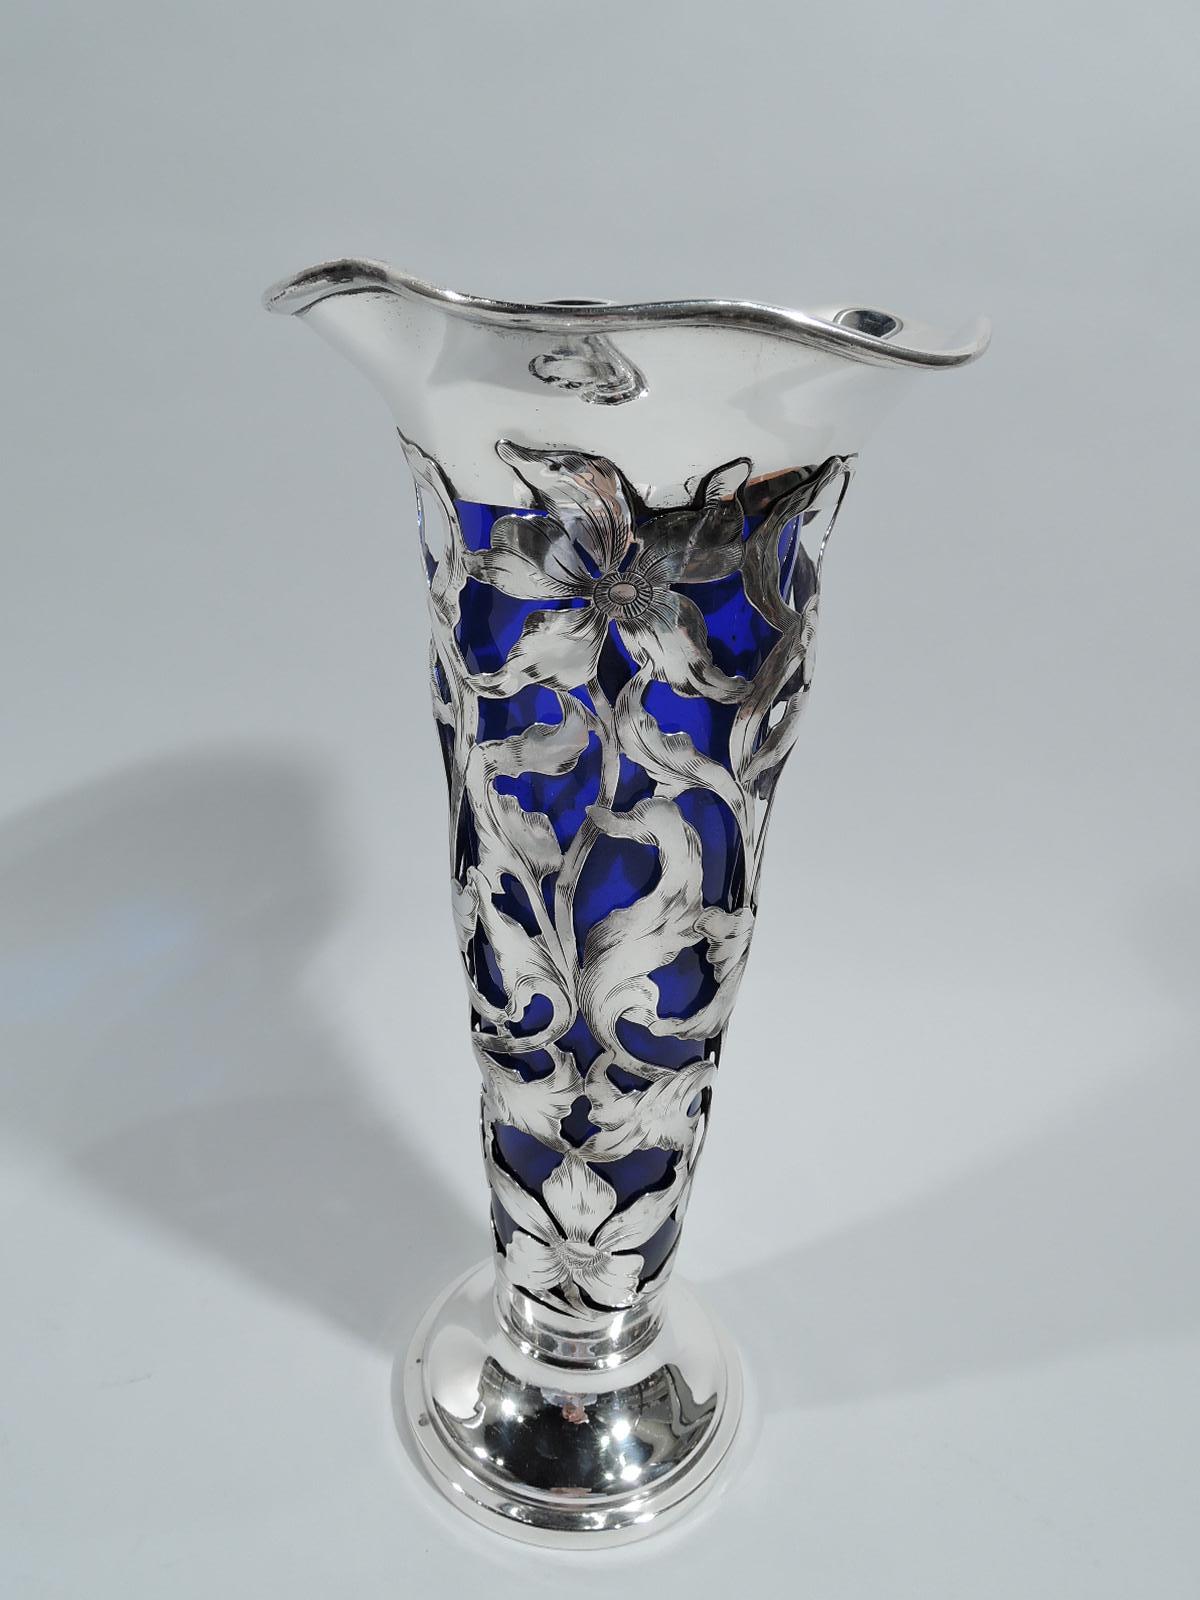 Art Nouveau sterling silver vase. Made by George A. Henckel & Co. in New York, ca 1910. Tapering open sides with engraved openwork in form of flowers and entwined and whiplash tendrils. Stapped and raised foot. Ruffled rim. Detachable cobalt glass